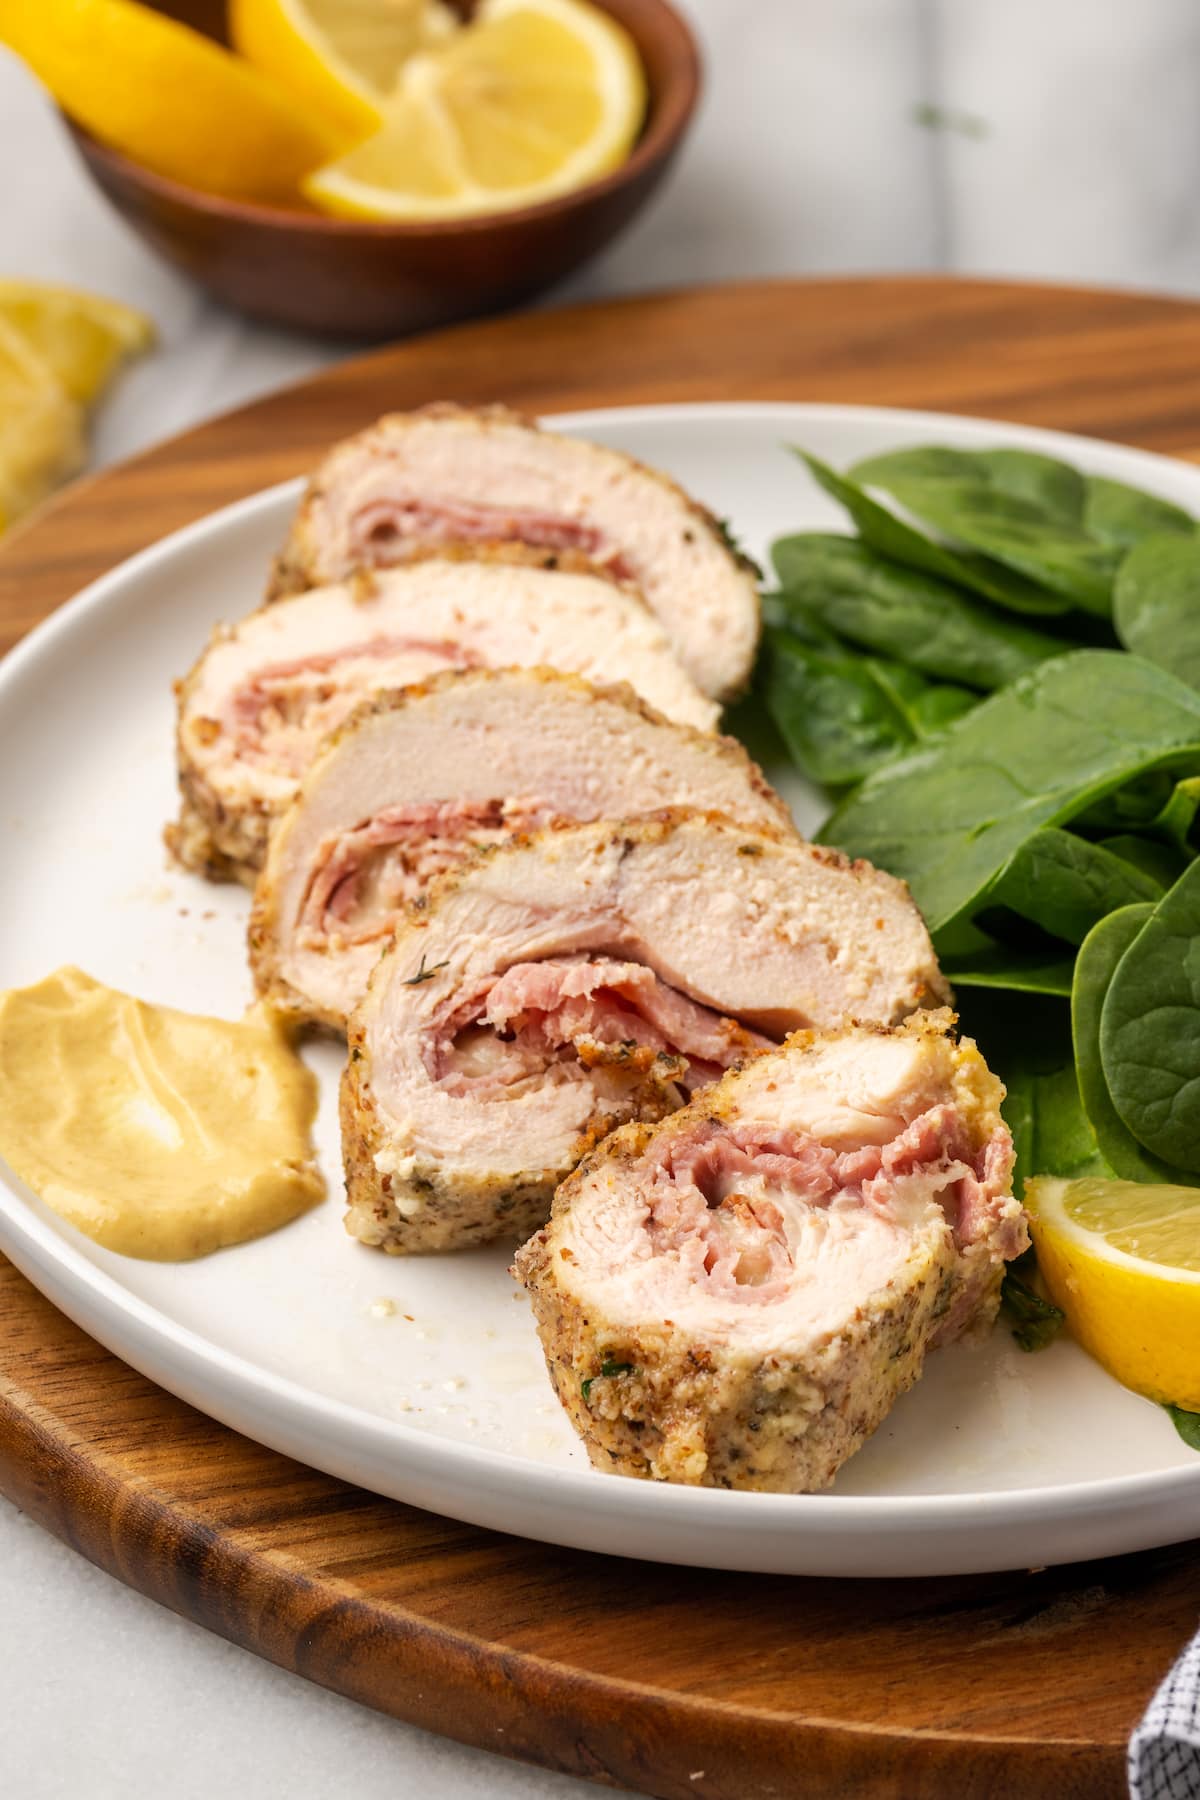 Five slices of chicken cordon bleu on a plate with spinach, mustard, and a lemon slice, with more slices in the background